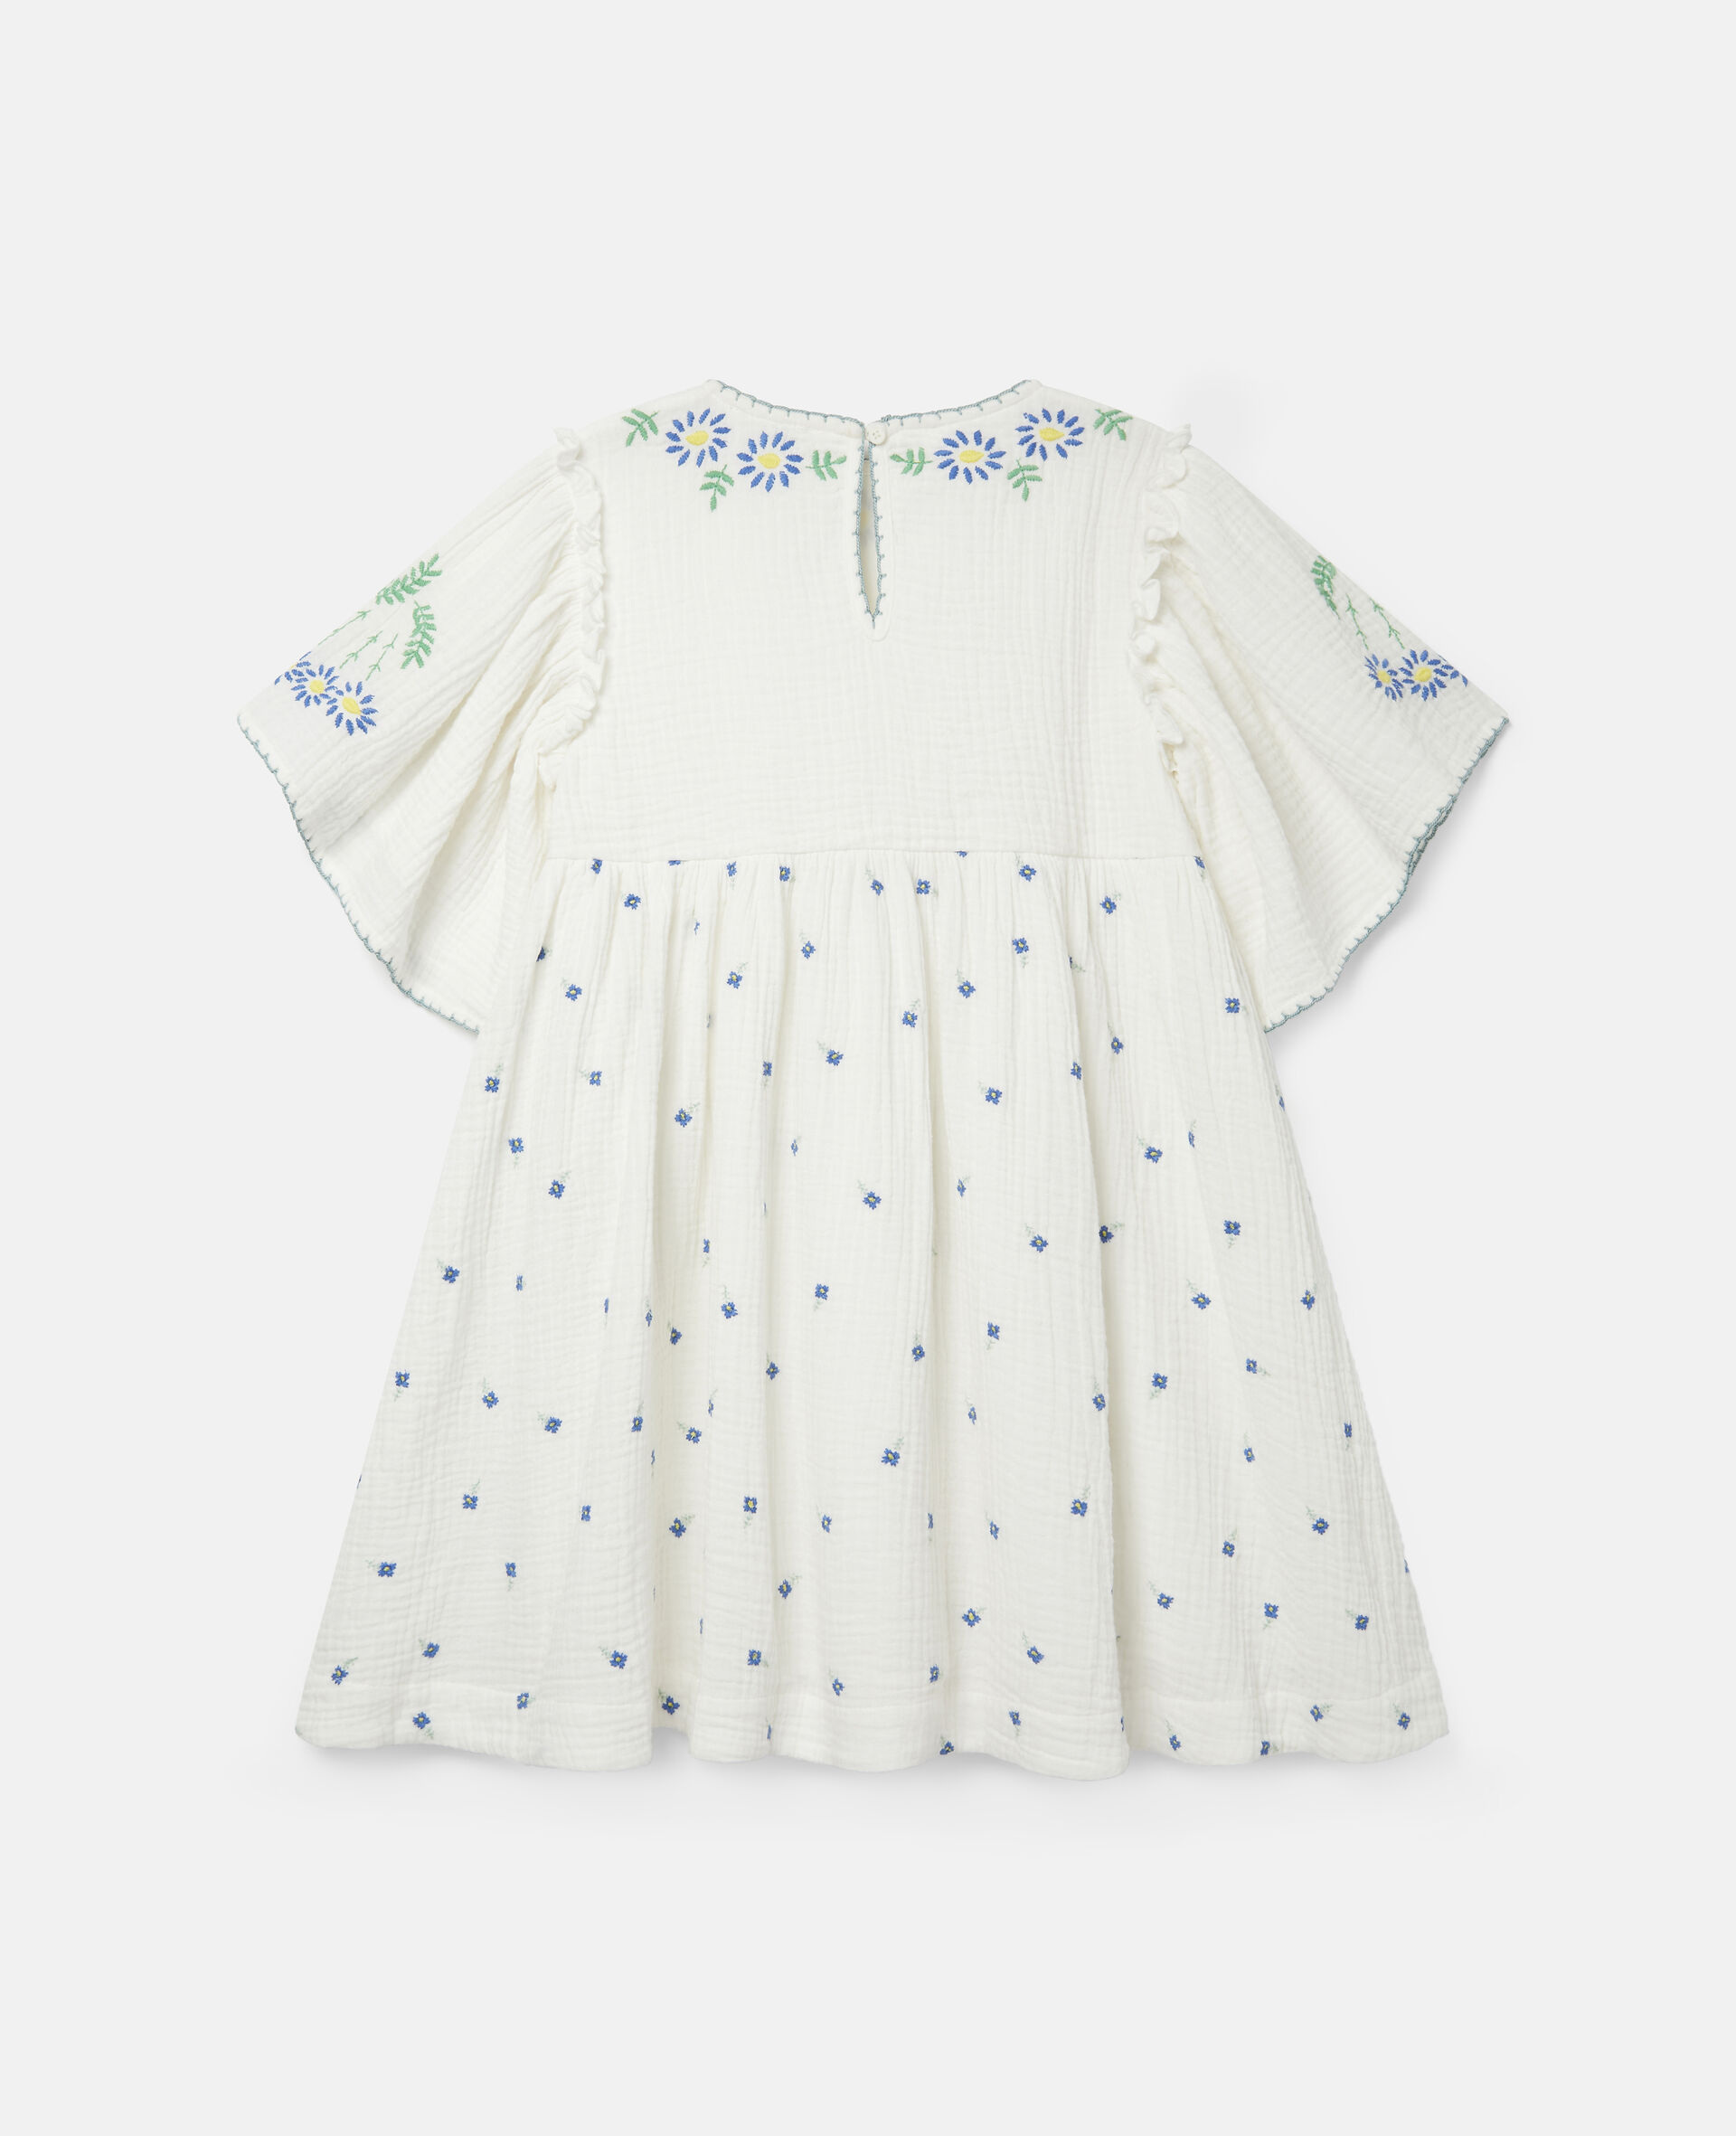 Embroidered Flowers Cotton Dress-White-large image number 3